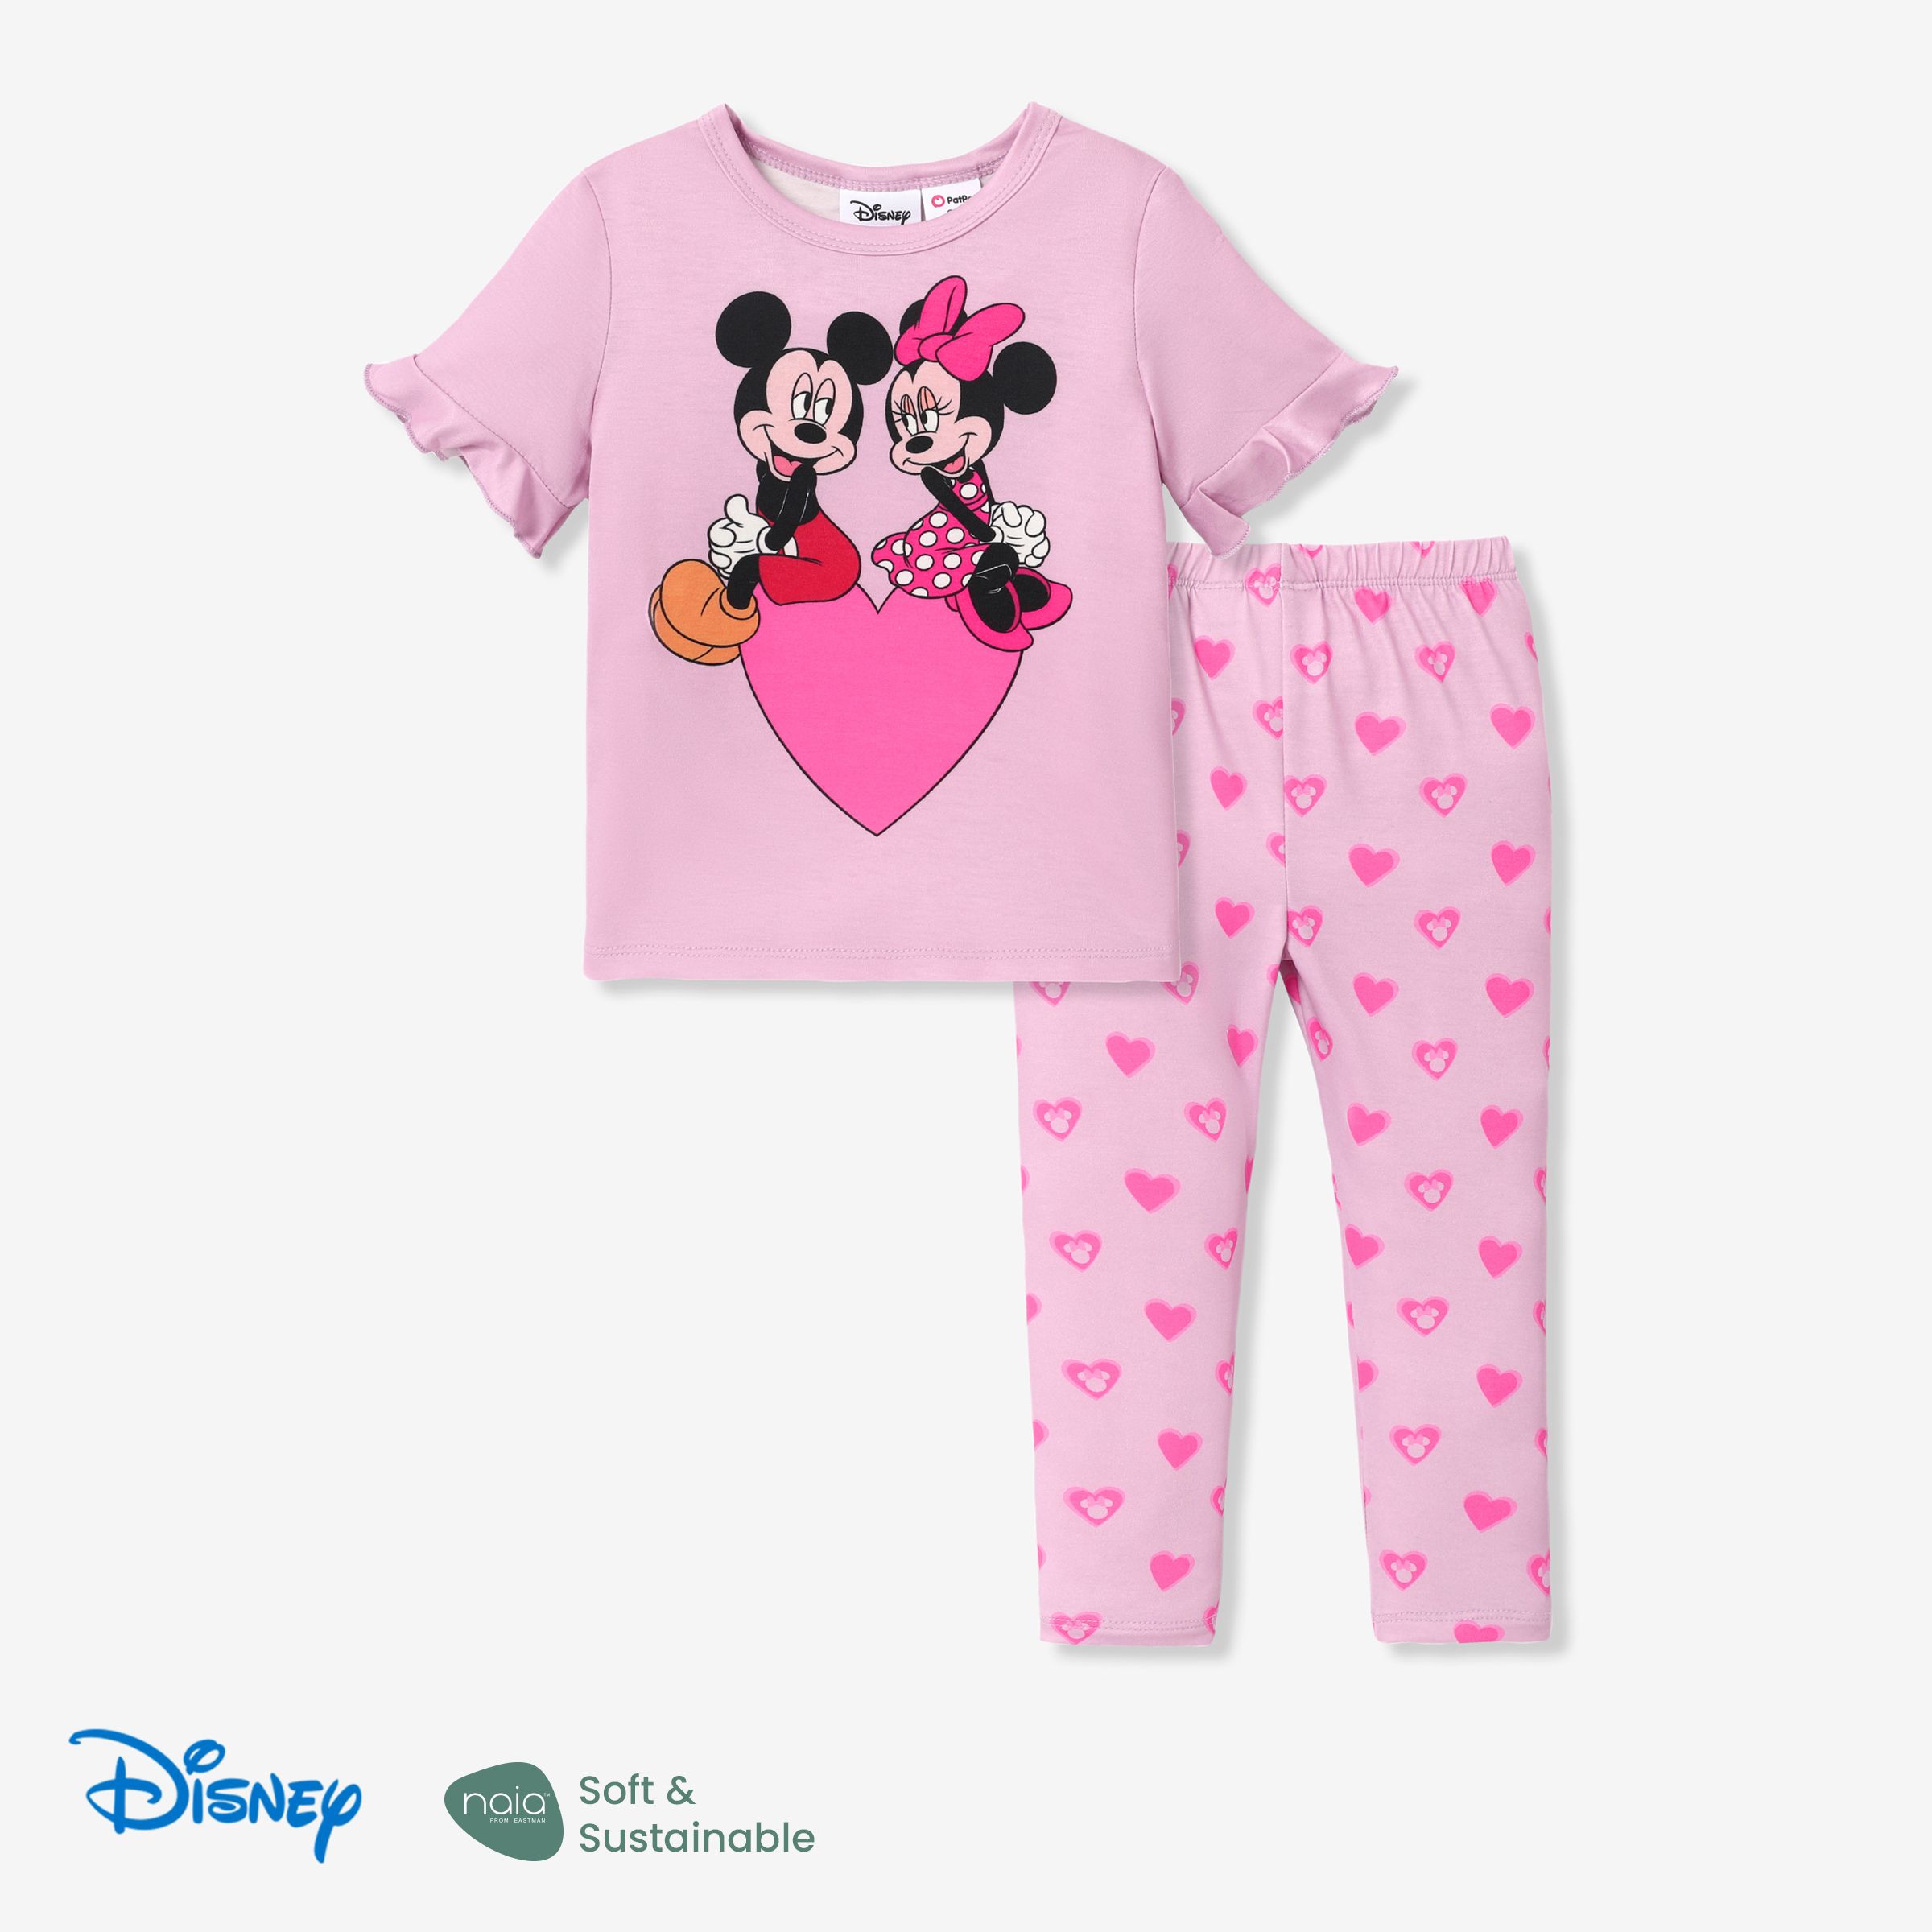 Disney Mickey And Friends Valentine's Day Toddler Girl Naiaâ¢ Character Print Tee And Pants Set